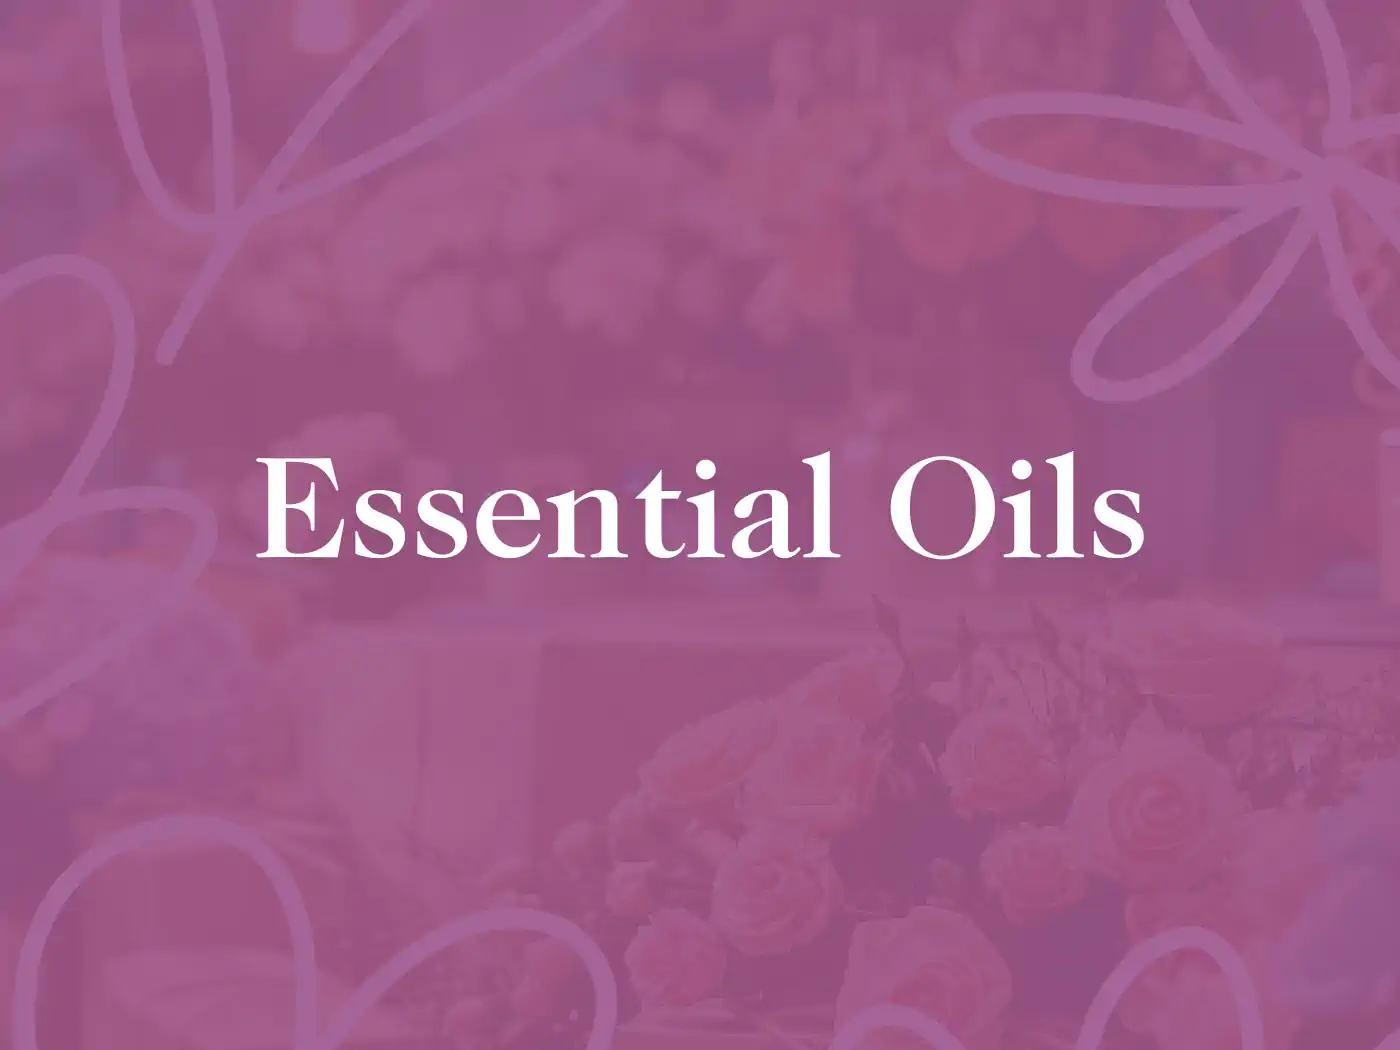 Text 'Essential Oils' on a pink background with floral accents. Collection: Essential Oils, Fabulous Flowers & Gifts.